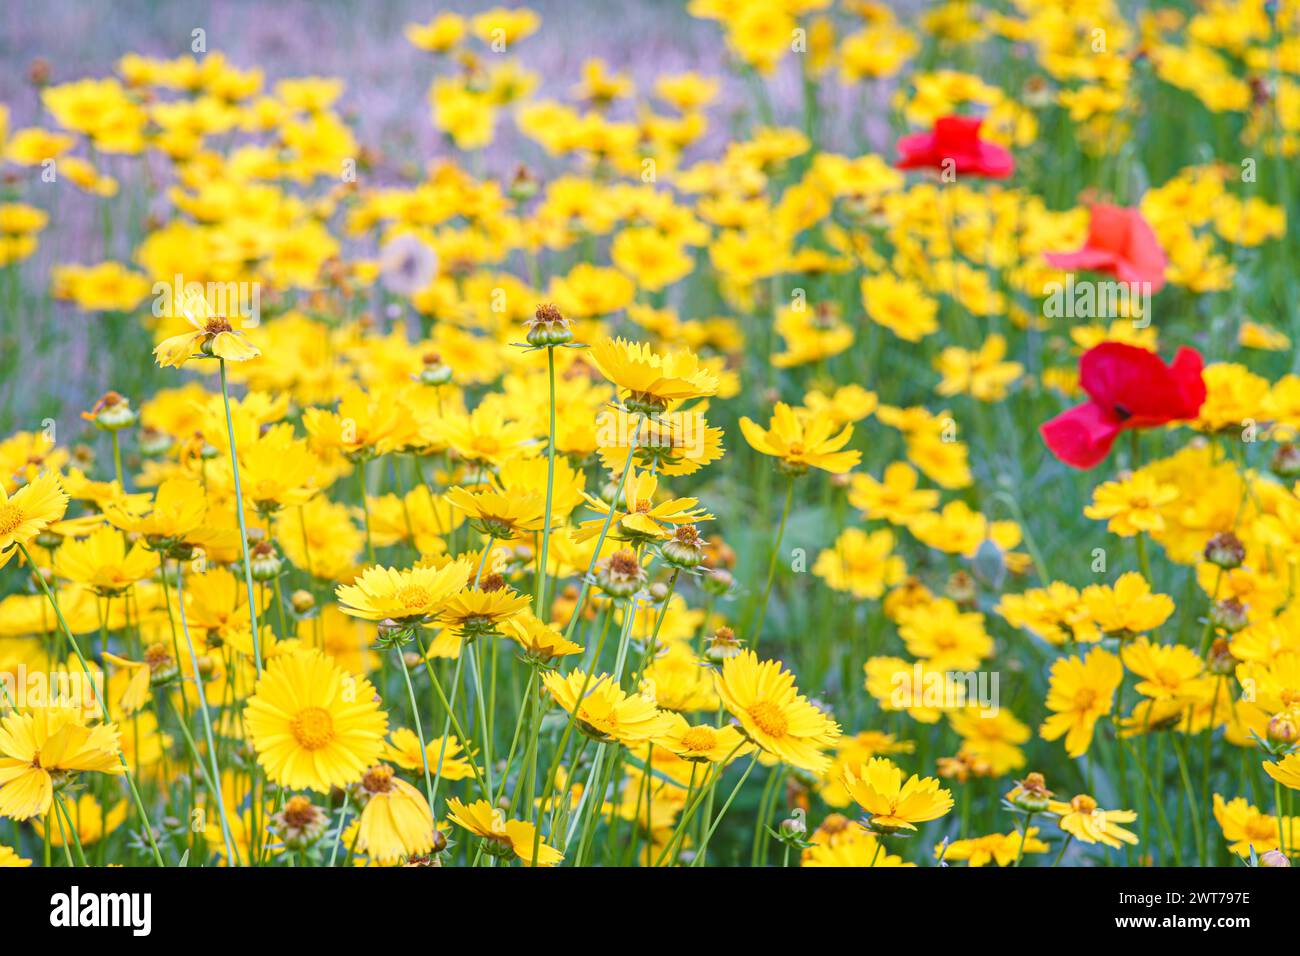 Field of yellow flower Coreopsis lanceolata, Lanceleaf Tickseed or Maiden's eye blooming in summer. Nature, plant, floral background. Garden, lawn of Stock Photo